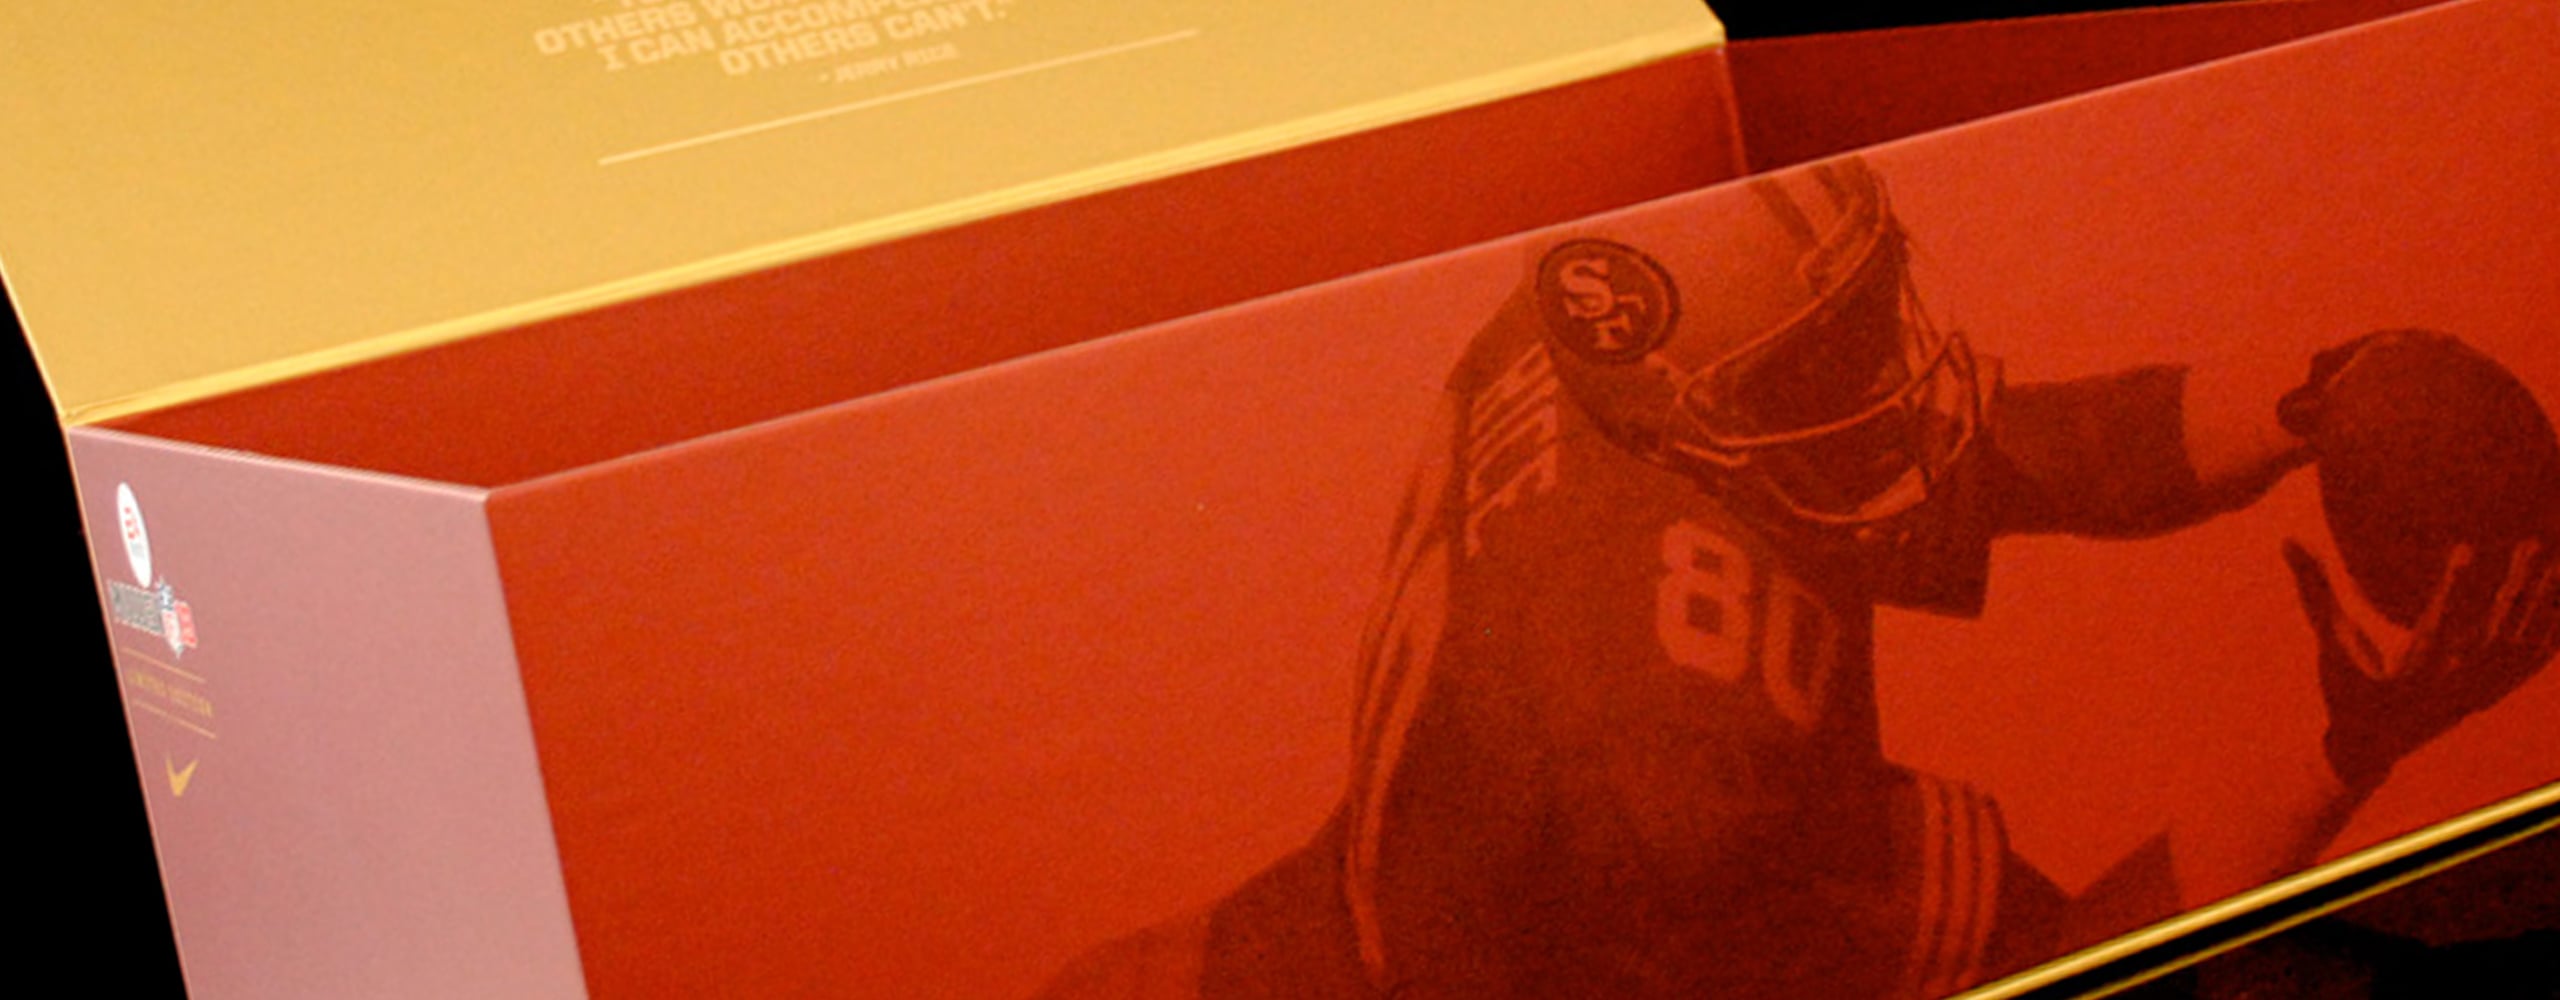 Banner for Nike Gold "Fast is Fastest" NFL Influencer Box